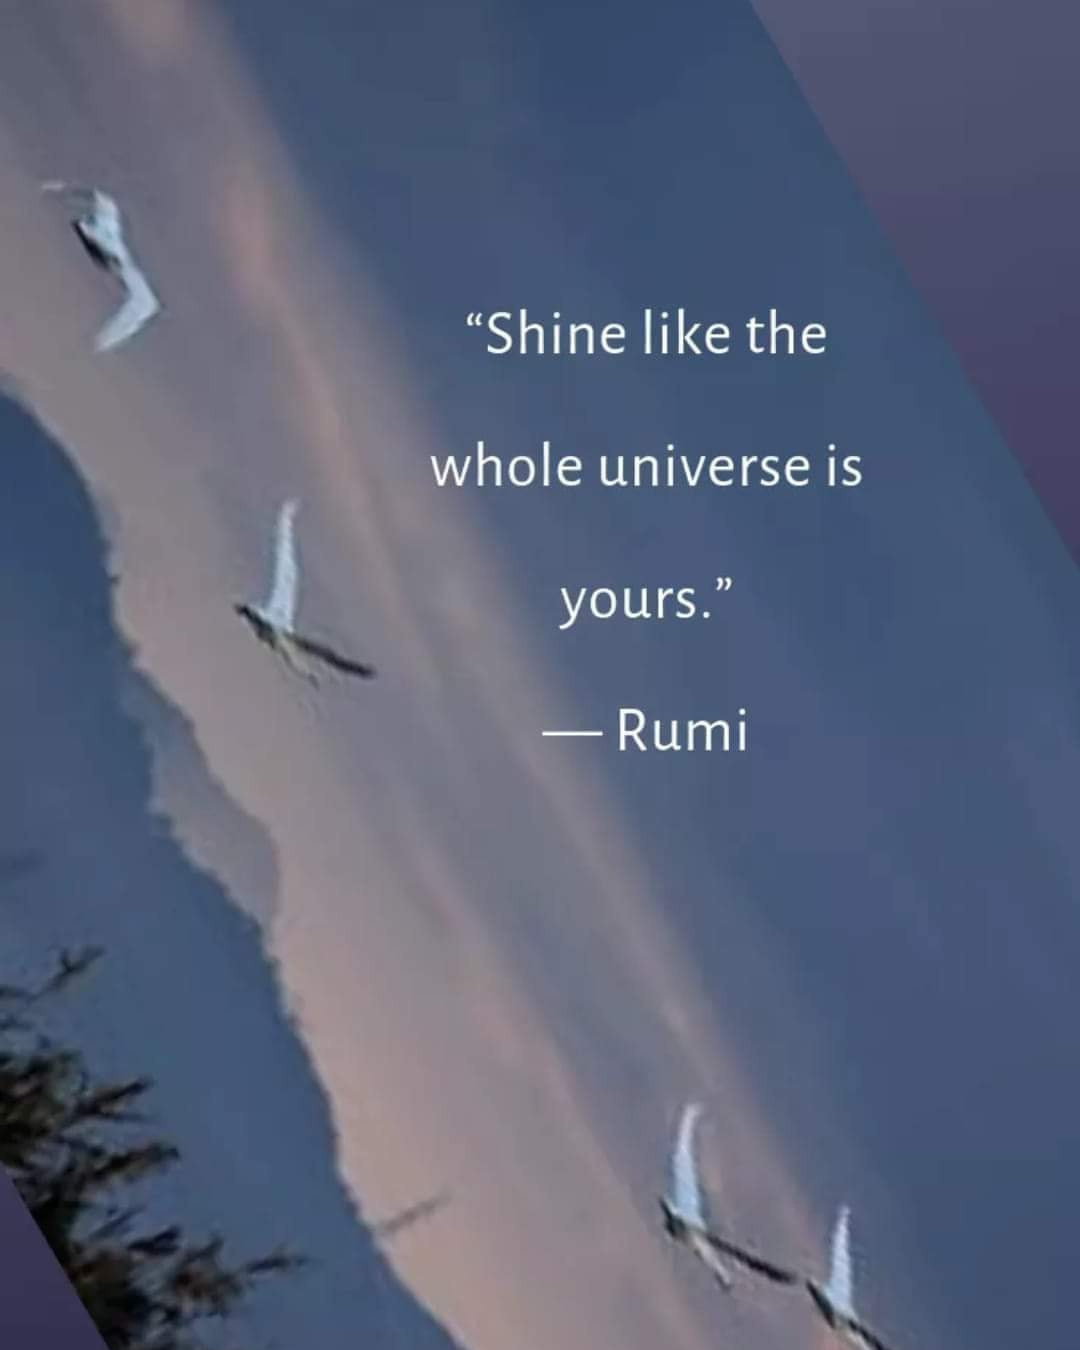 Shine like the whole universe is yours. - Phrases